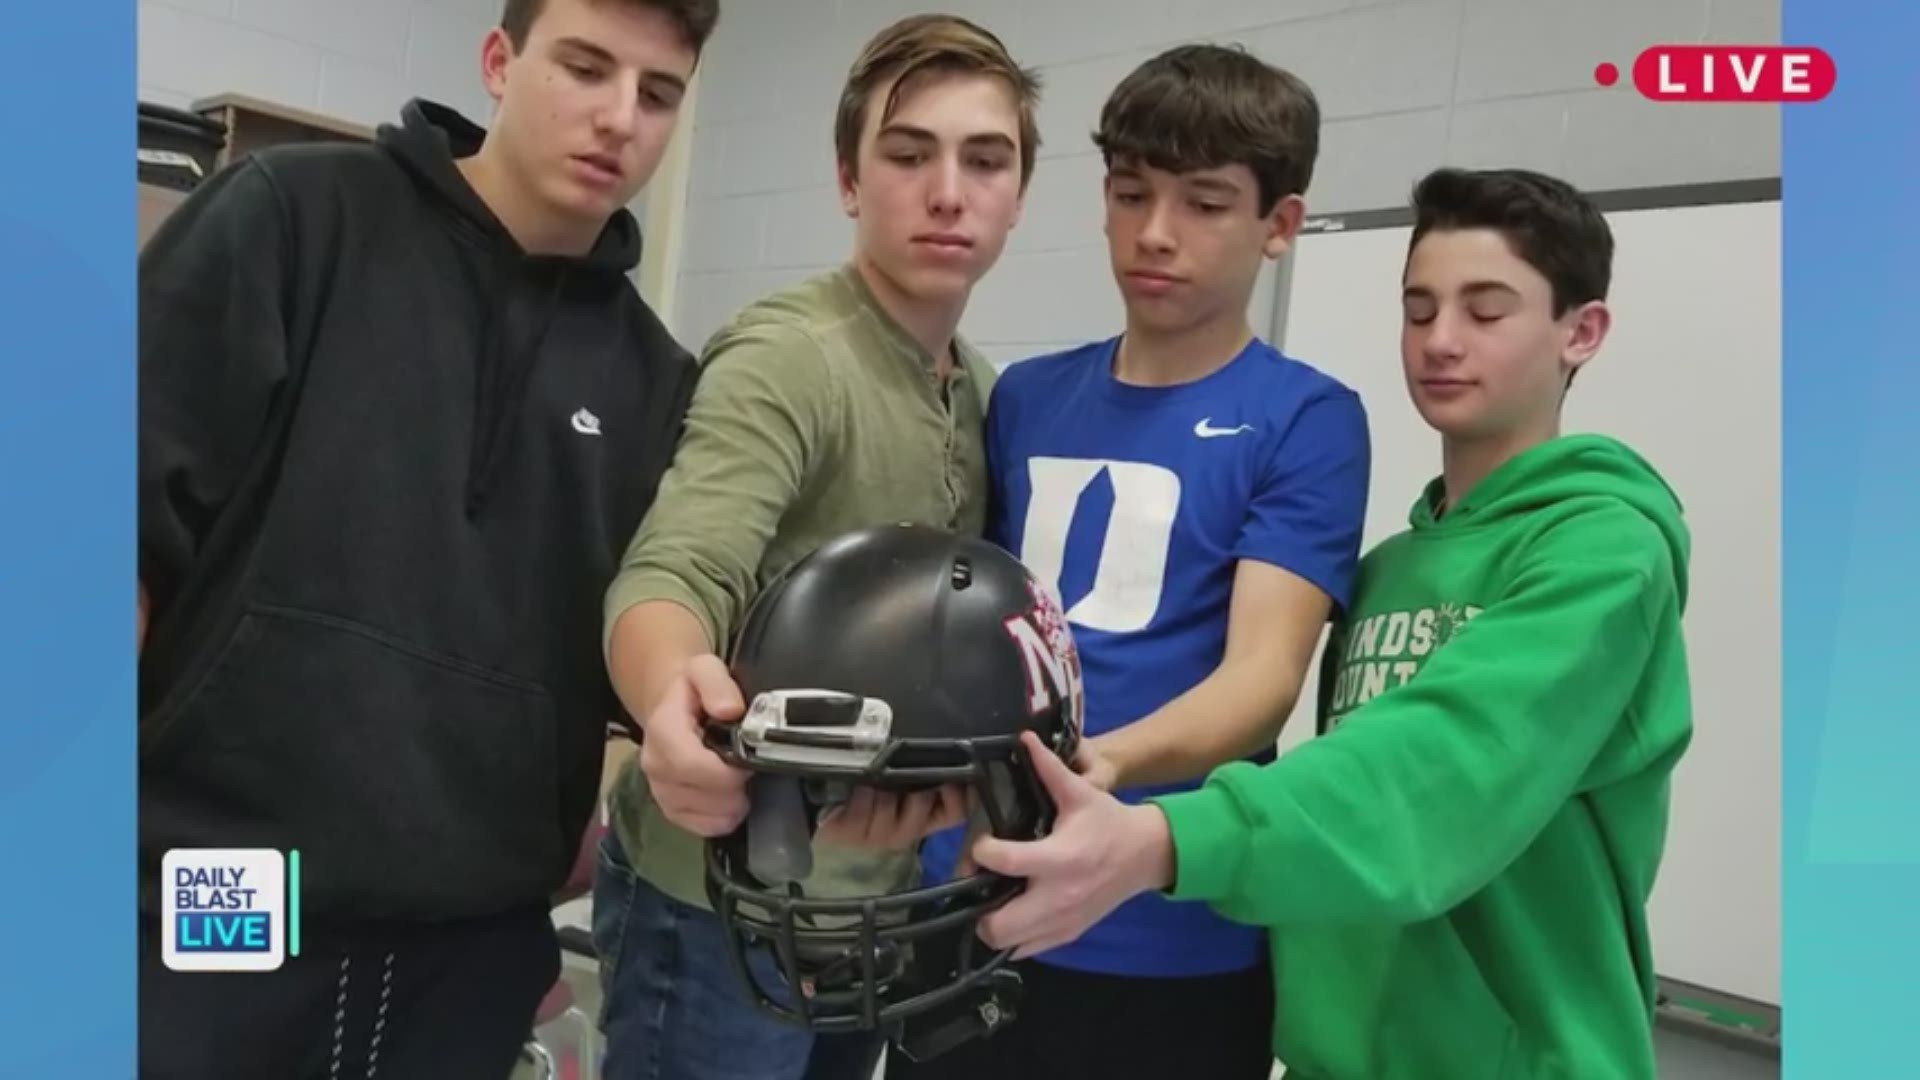 Students come up with device to allow football helmets to detect concussions.